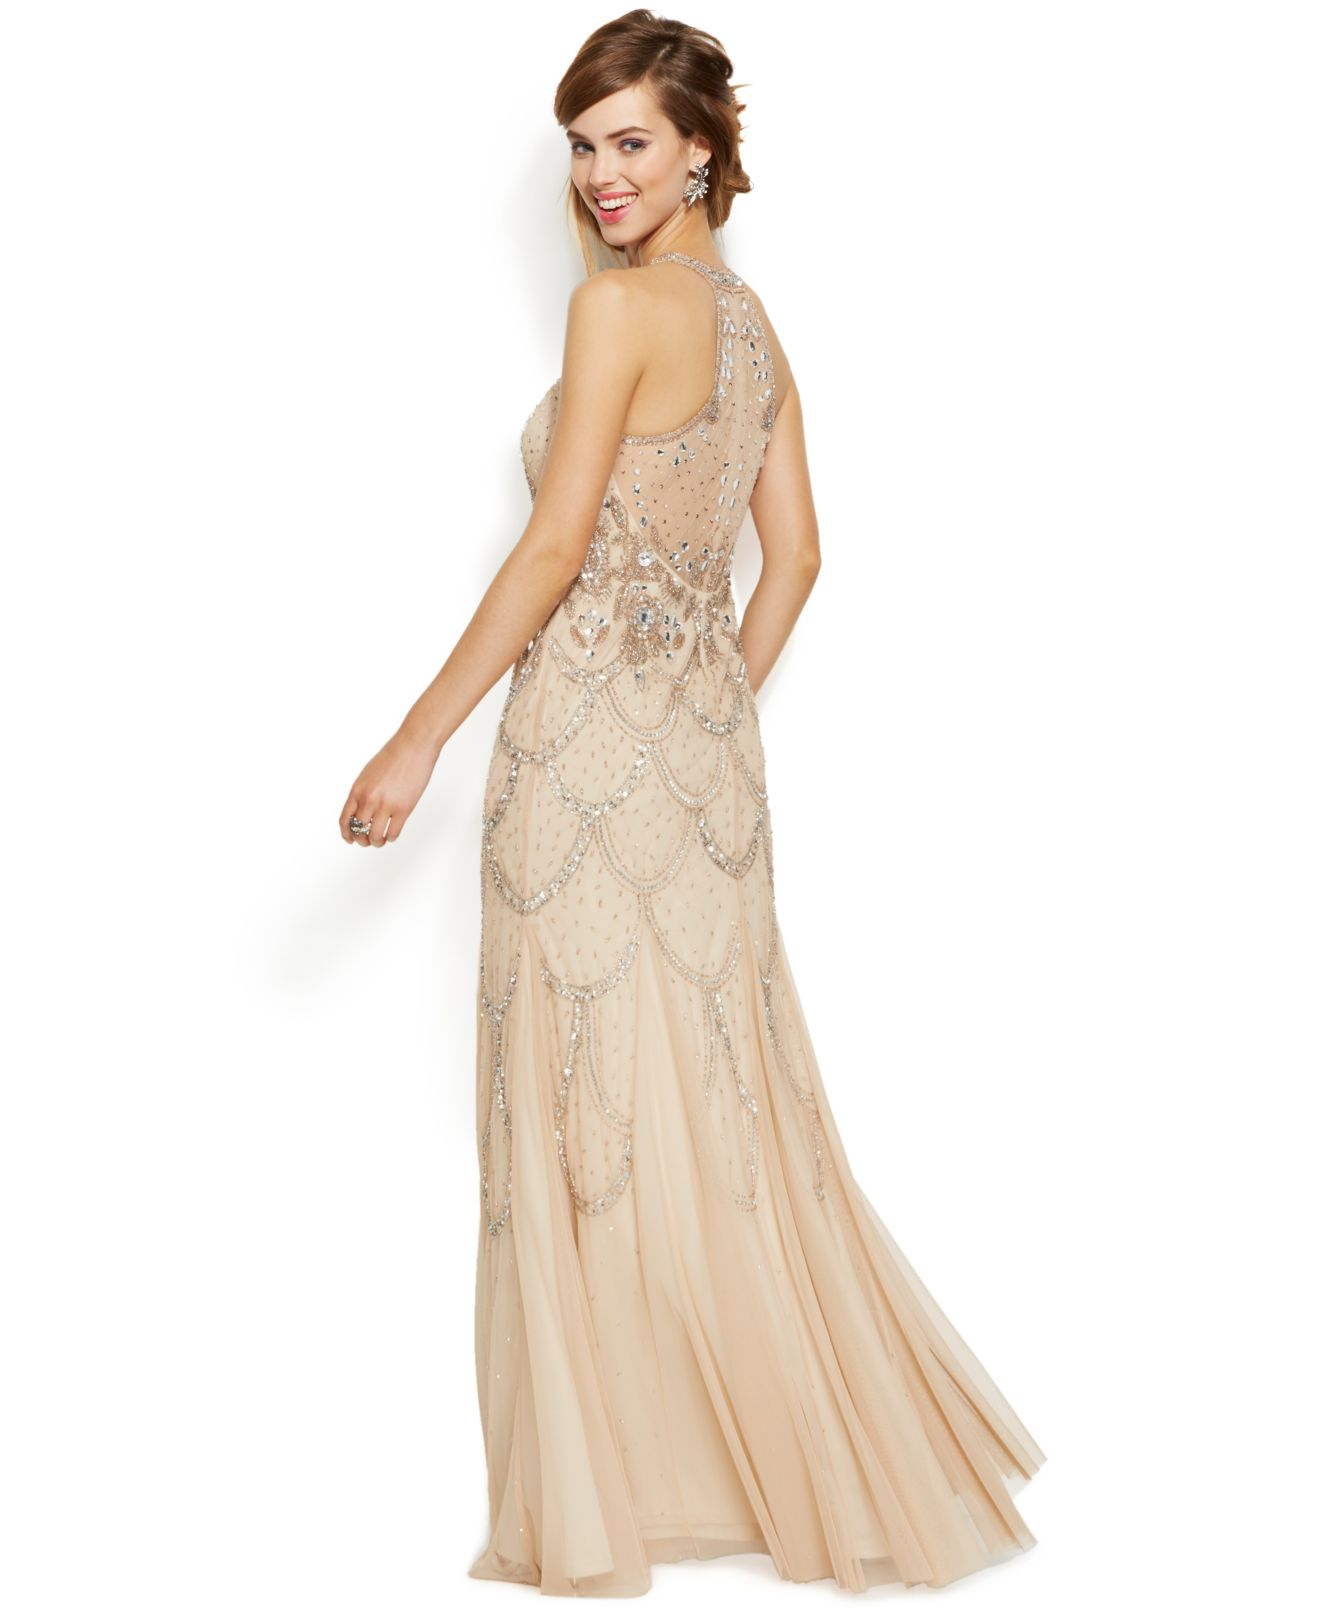 Lyst - Adrianna Papell Embellished Chiffon Illusion Gown in Natural